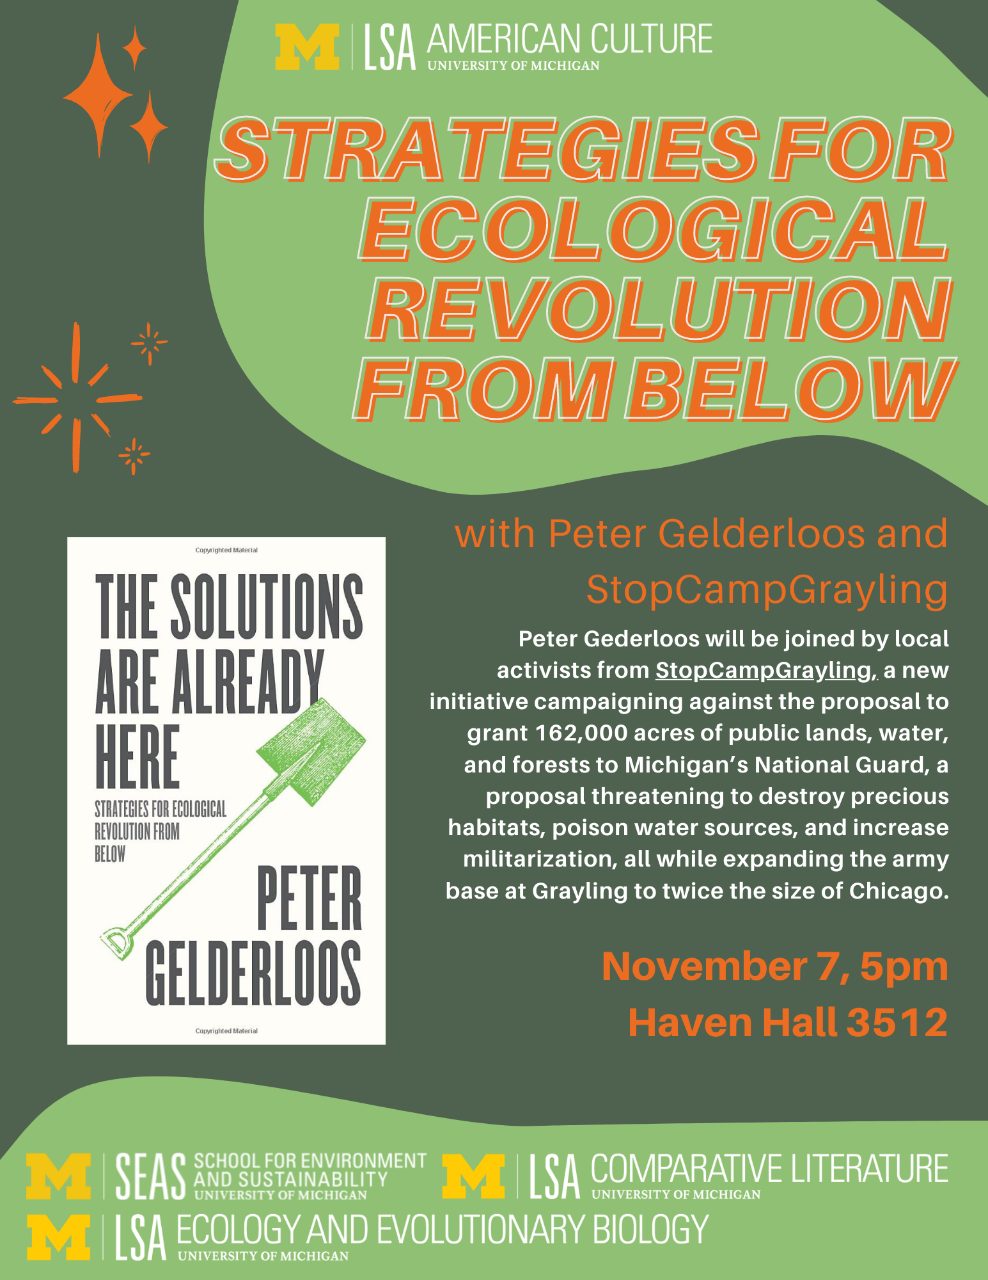 Text, “Strategies for Ecological Revolution from Below with Peter Gelderloos and StopCampGrayling. Peter Gederloos will be joined by local activists from StopCampGrayling, a new initiative campaigning against the proposal to grant 162,000 acres of public lands, water, and forests to Michigan’s National Guard, a proposal threatening to destroy precious habitats, poison water sources, and increase militarization, all while expanding the army base at Grayling to twice the size of Chicago. November 7, 5PM, Haven Hall 3512.”